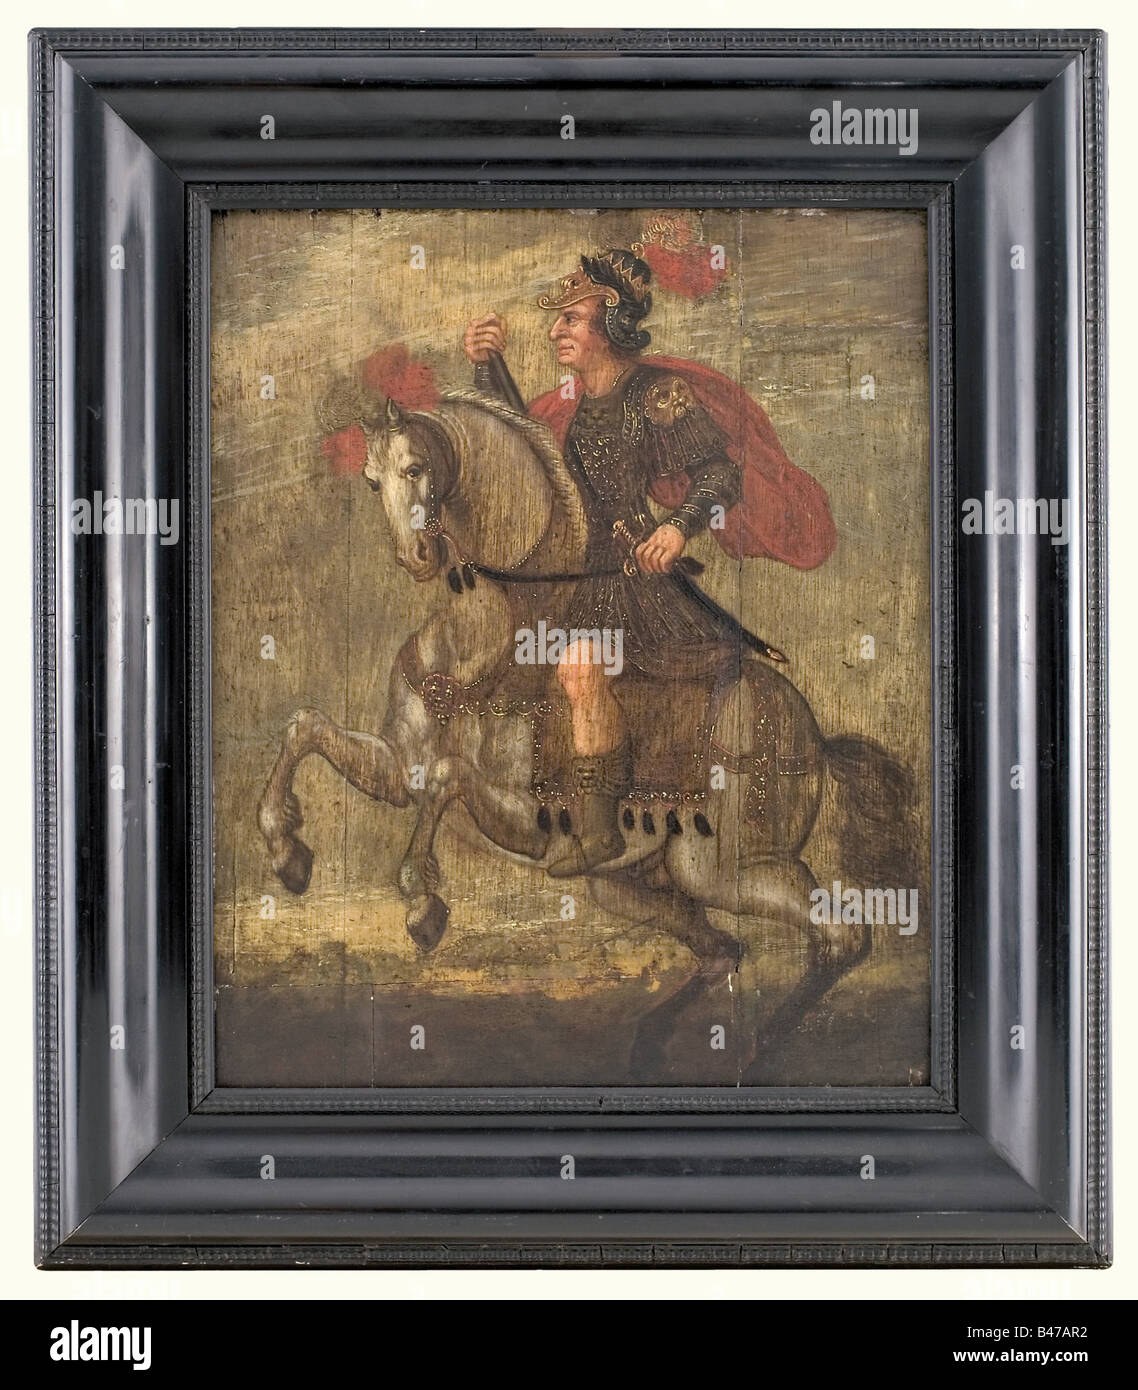 A Commander on horseback, Spain, 17th century. Oil on wood. A commander in ancient-style armour on a rearing horse in front of a suggested landscape. Restored on the upper right, parqueted. In an ebonised profile frame. Size of the panel 43 x 53 cm, framed 62 x 72 cm. Appealing portrayal of an ancient commander, probably Julius Caesar, which indicates the influence of Peter Paul Rubens. fine arts, people, 17th century, fine arts, art, painting, paintings, man, men, male, Artist's Copyright has not to be cleared Stock Photo